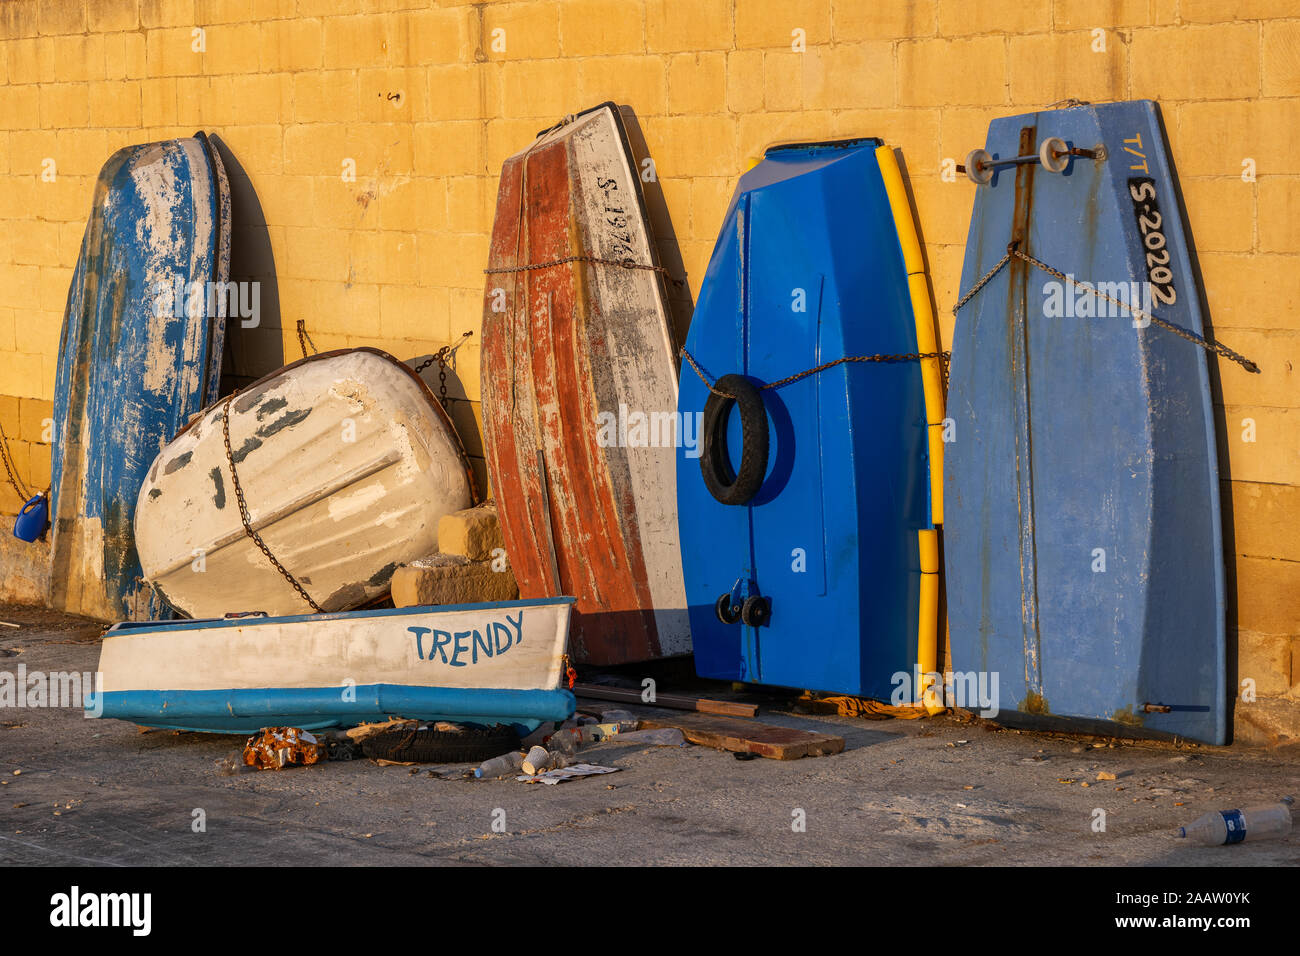 Small old boats, dingies left to dry, some stored vertically, secured with chain to a wall, Manoel Island quay in Malta Stock Photo